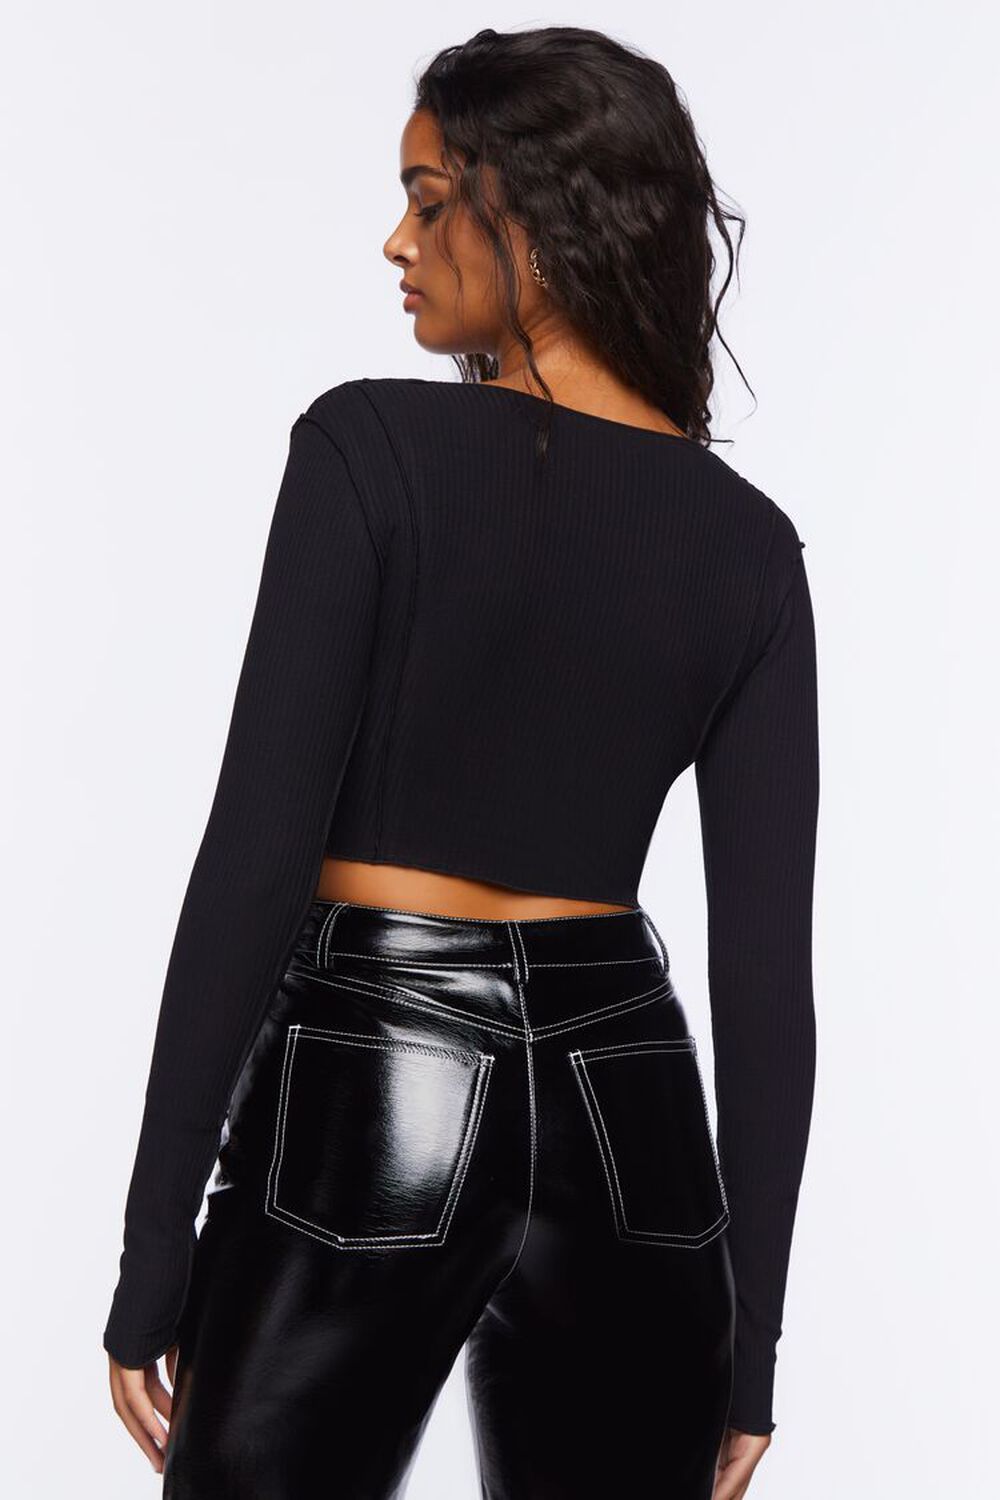 BLACK Lace-Up Long-Sleeve Crop Top, image 3